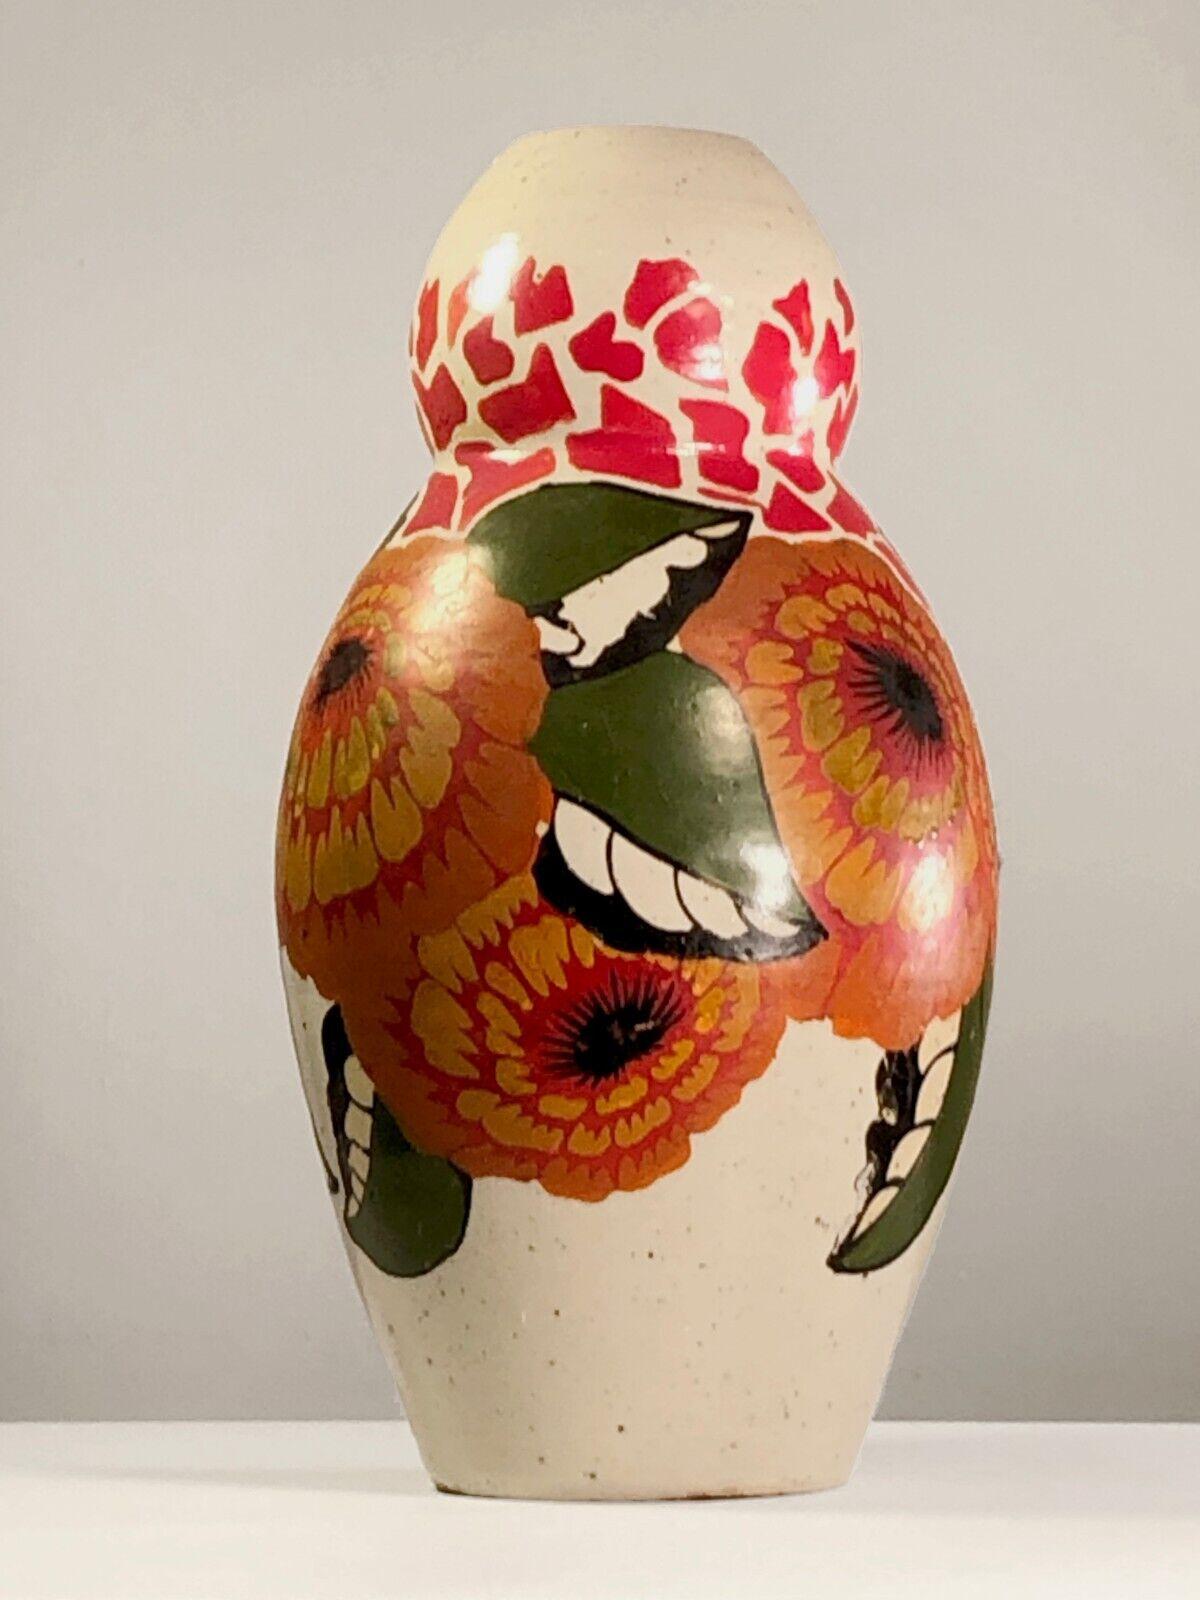 A rare and large Art-Deco, Art Nouveau, Modernist, vase, in beige stoneware with superb black, red, pink and dark green floral decoration, signed by stamp on the bottom, Betzy Augeron, France 1930.

Painter and ceramist from La Rochelle, Betzy